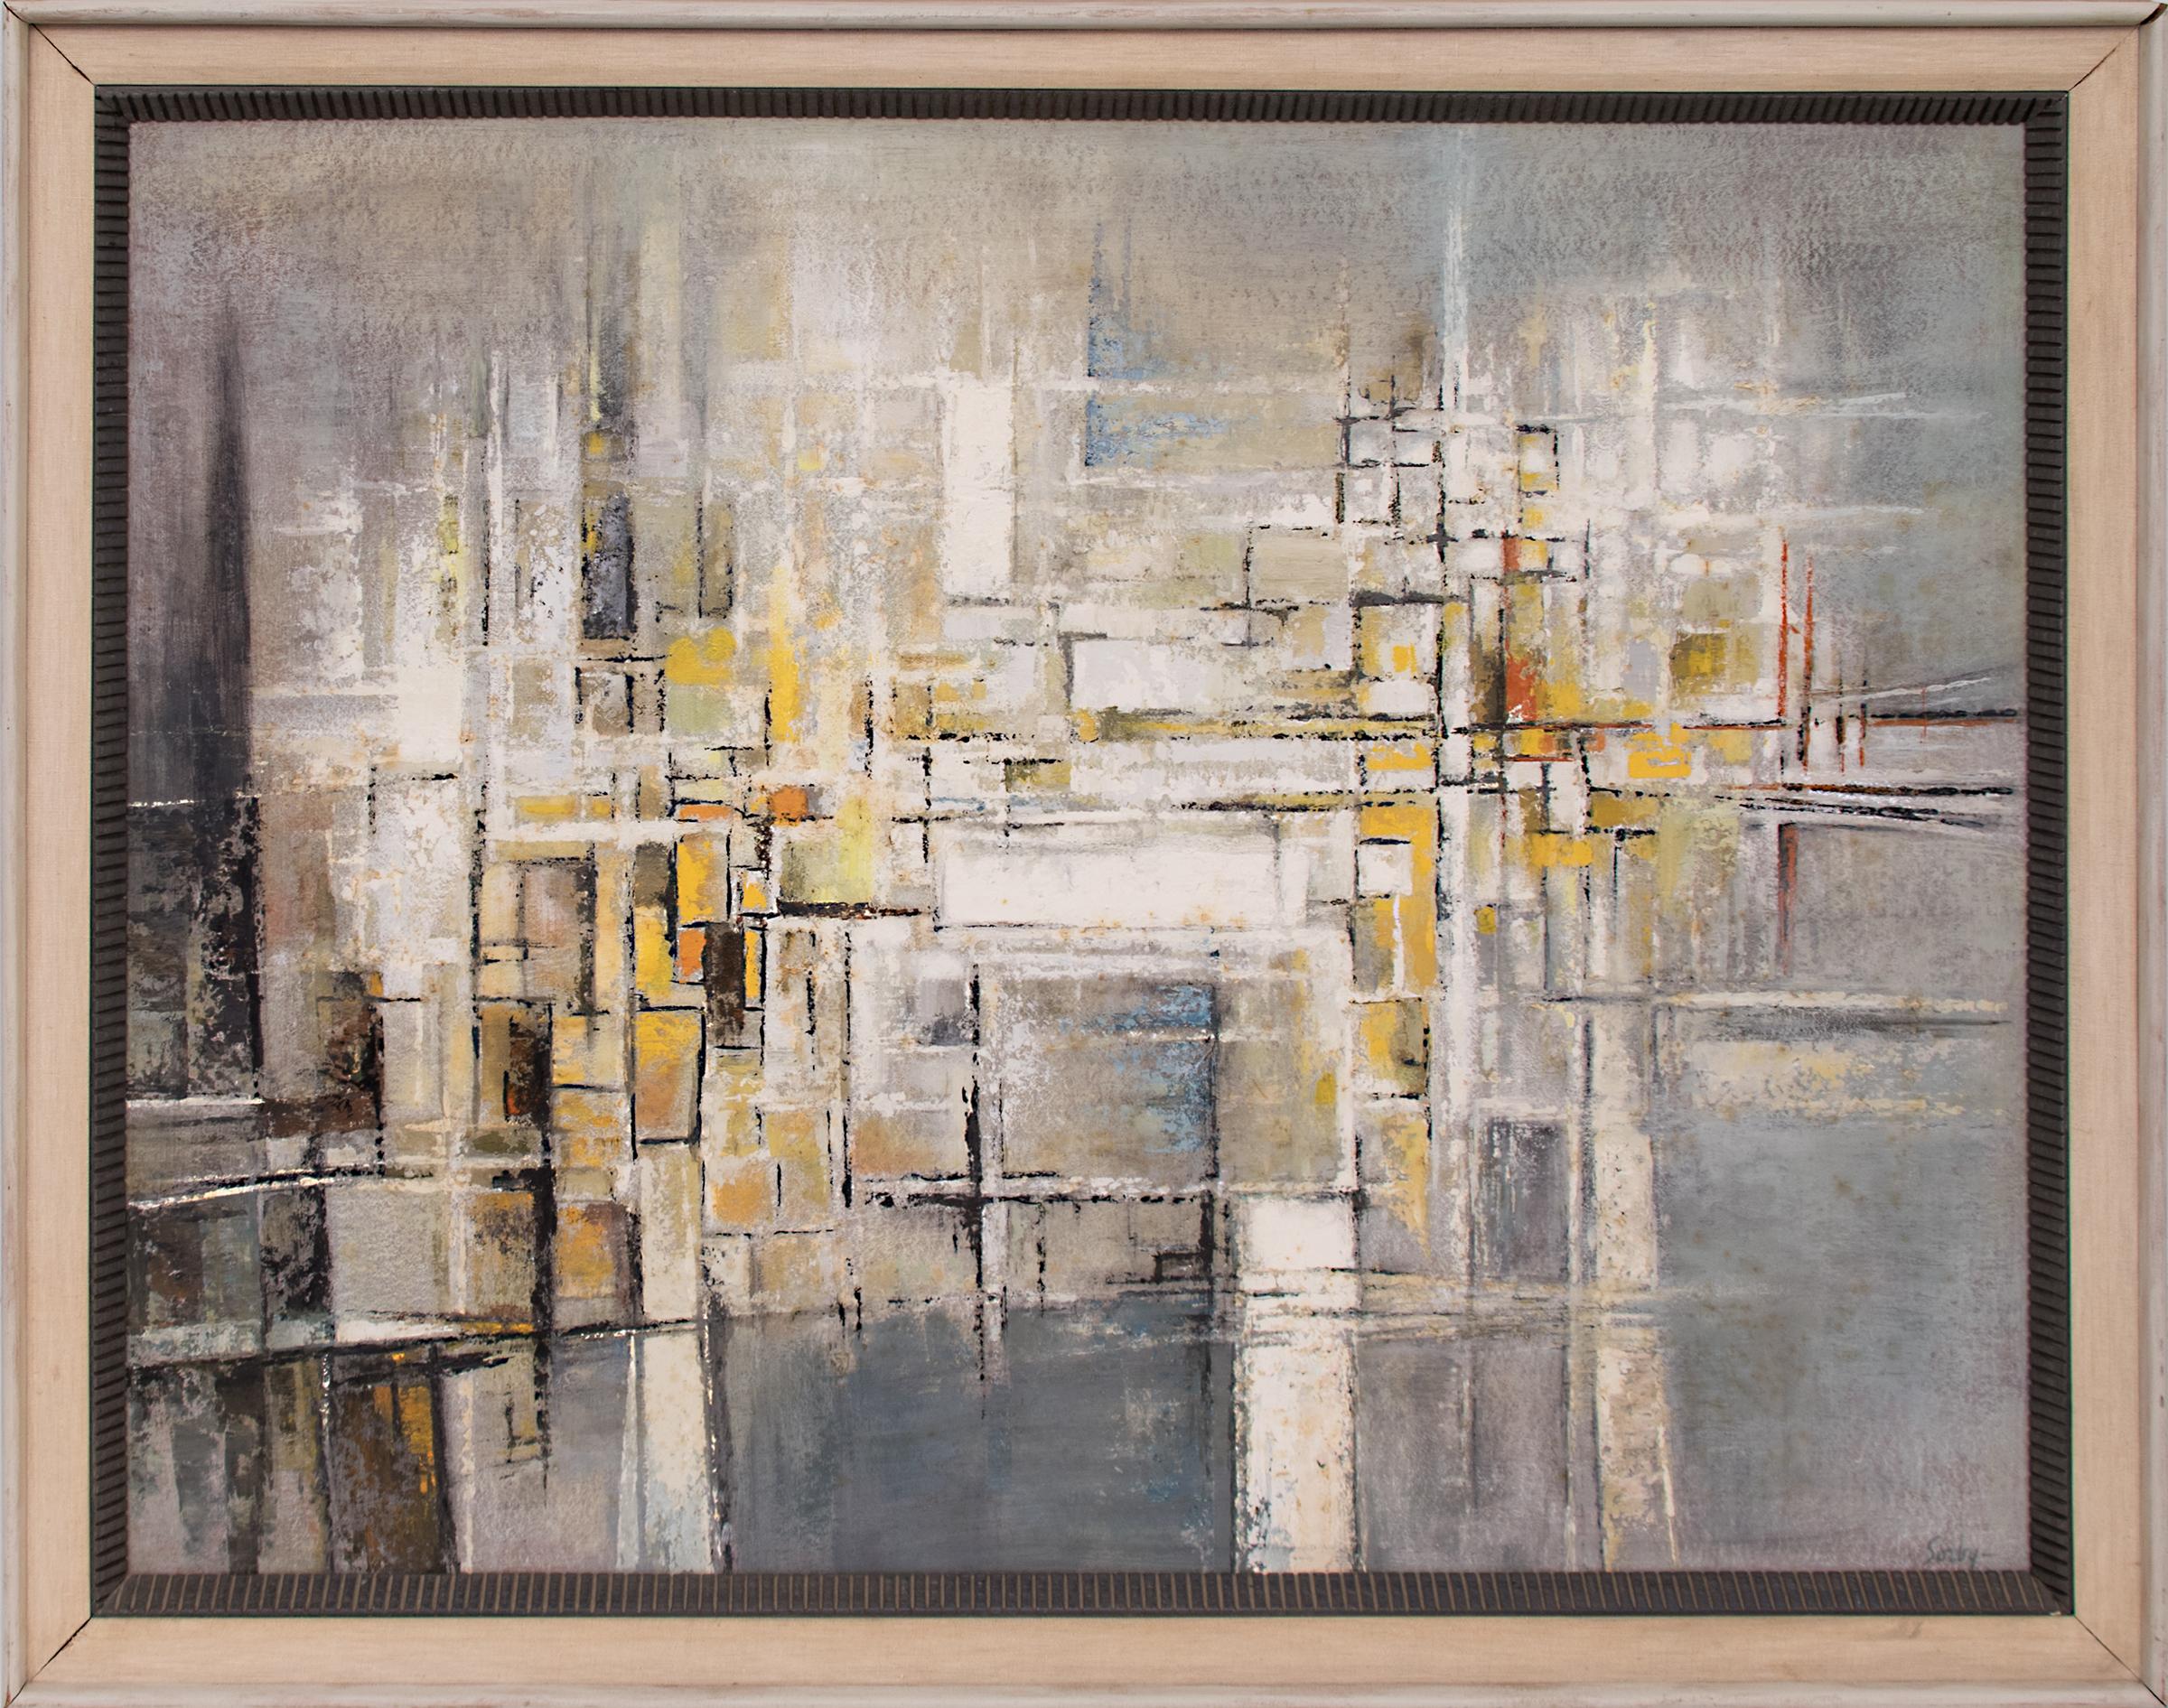 An abstract expressionist painting in oil and pyroxlin on masonite created around 1960 by Richard Sorby (1911-2001) in hues of blue, yellow, white, black and gray.  Presented in a vintage (likely original) frame, outer dimensions measure 34 x 42 ¼ x